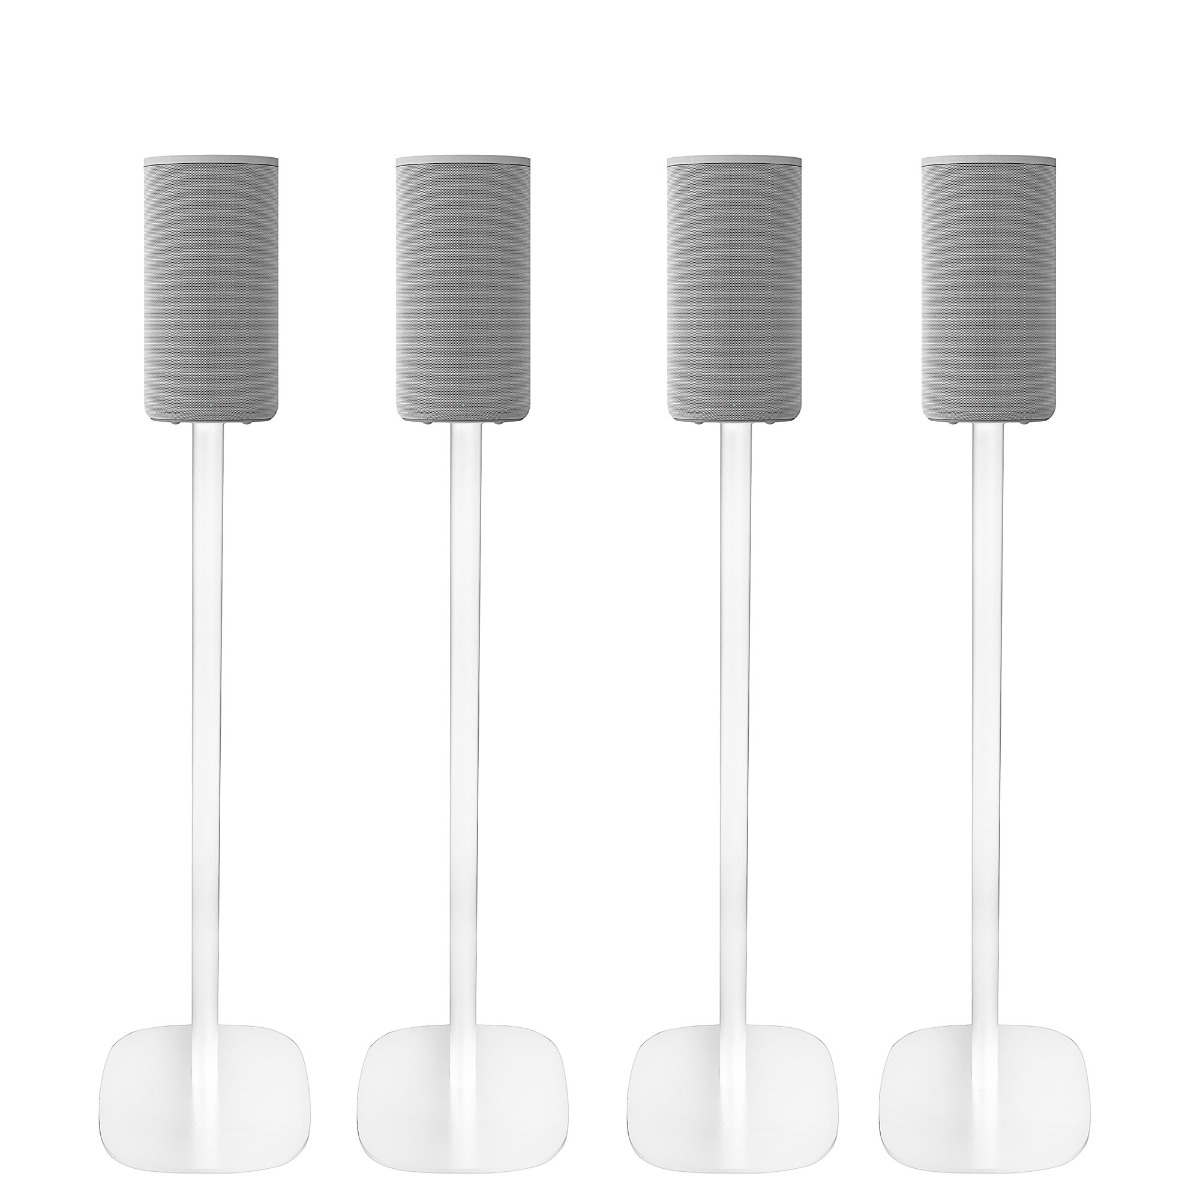 Vebos floor stand Sony HT-A9 white (4 pieces)